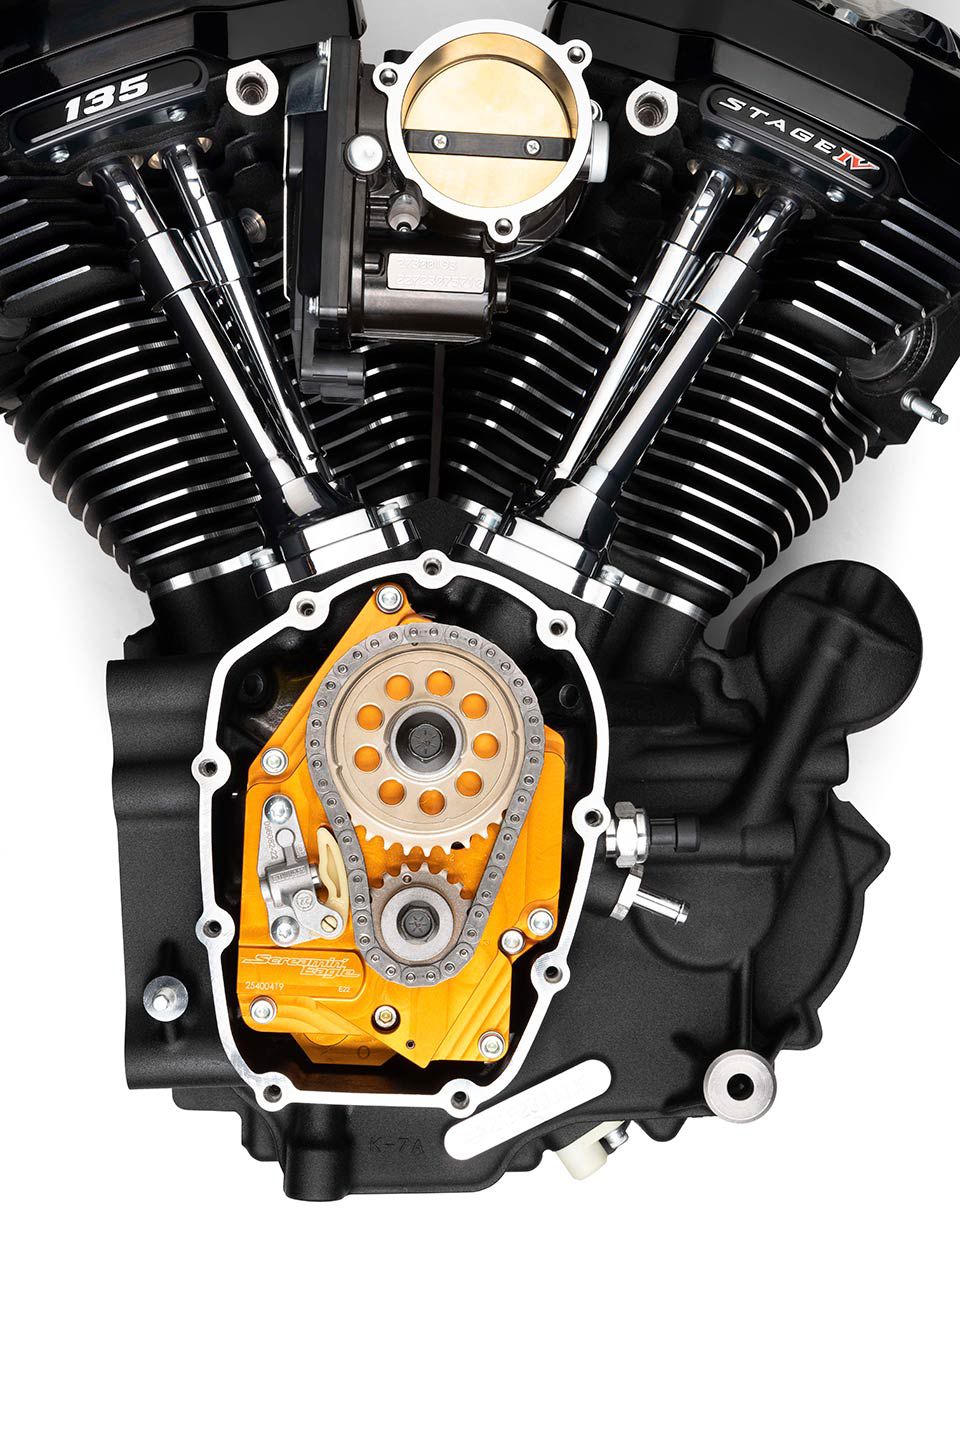 The new 2,122cc V-twin crate engine is packed with Screamin’ Eagle upgrades.